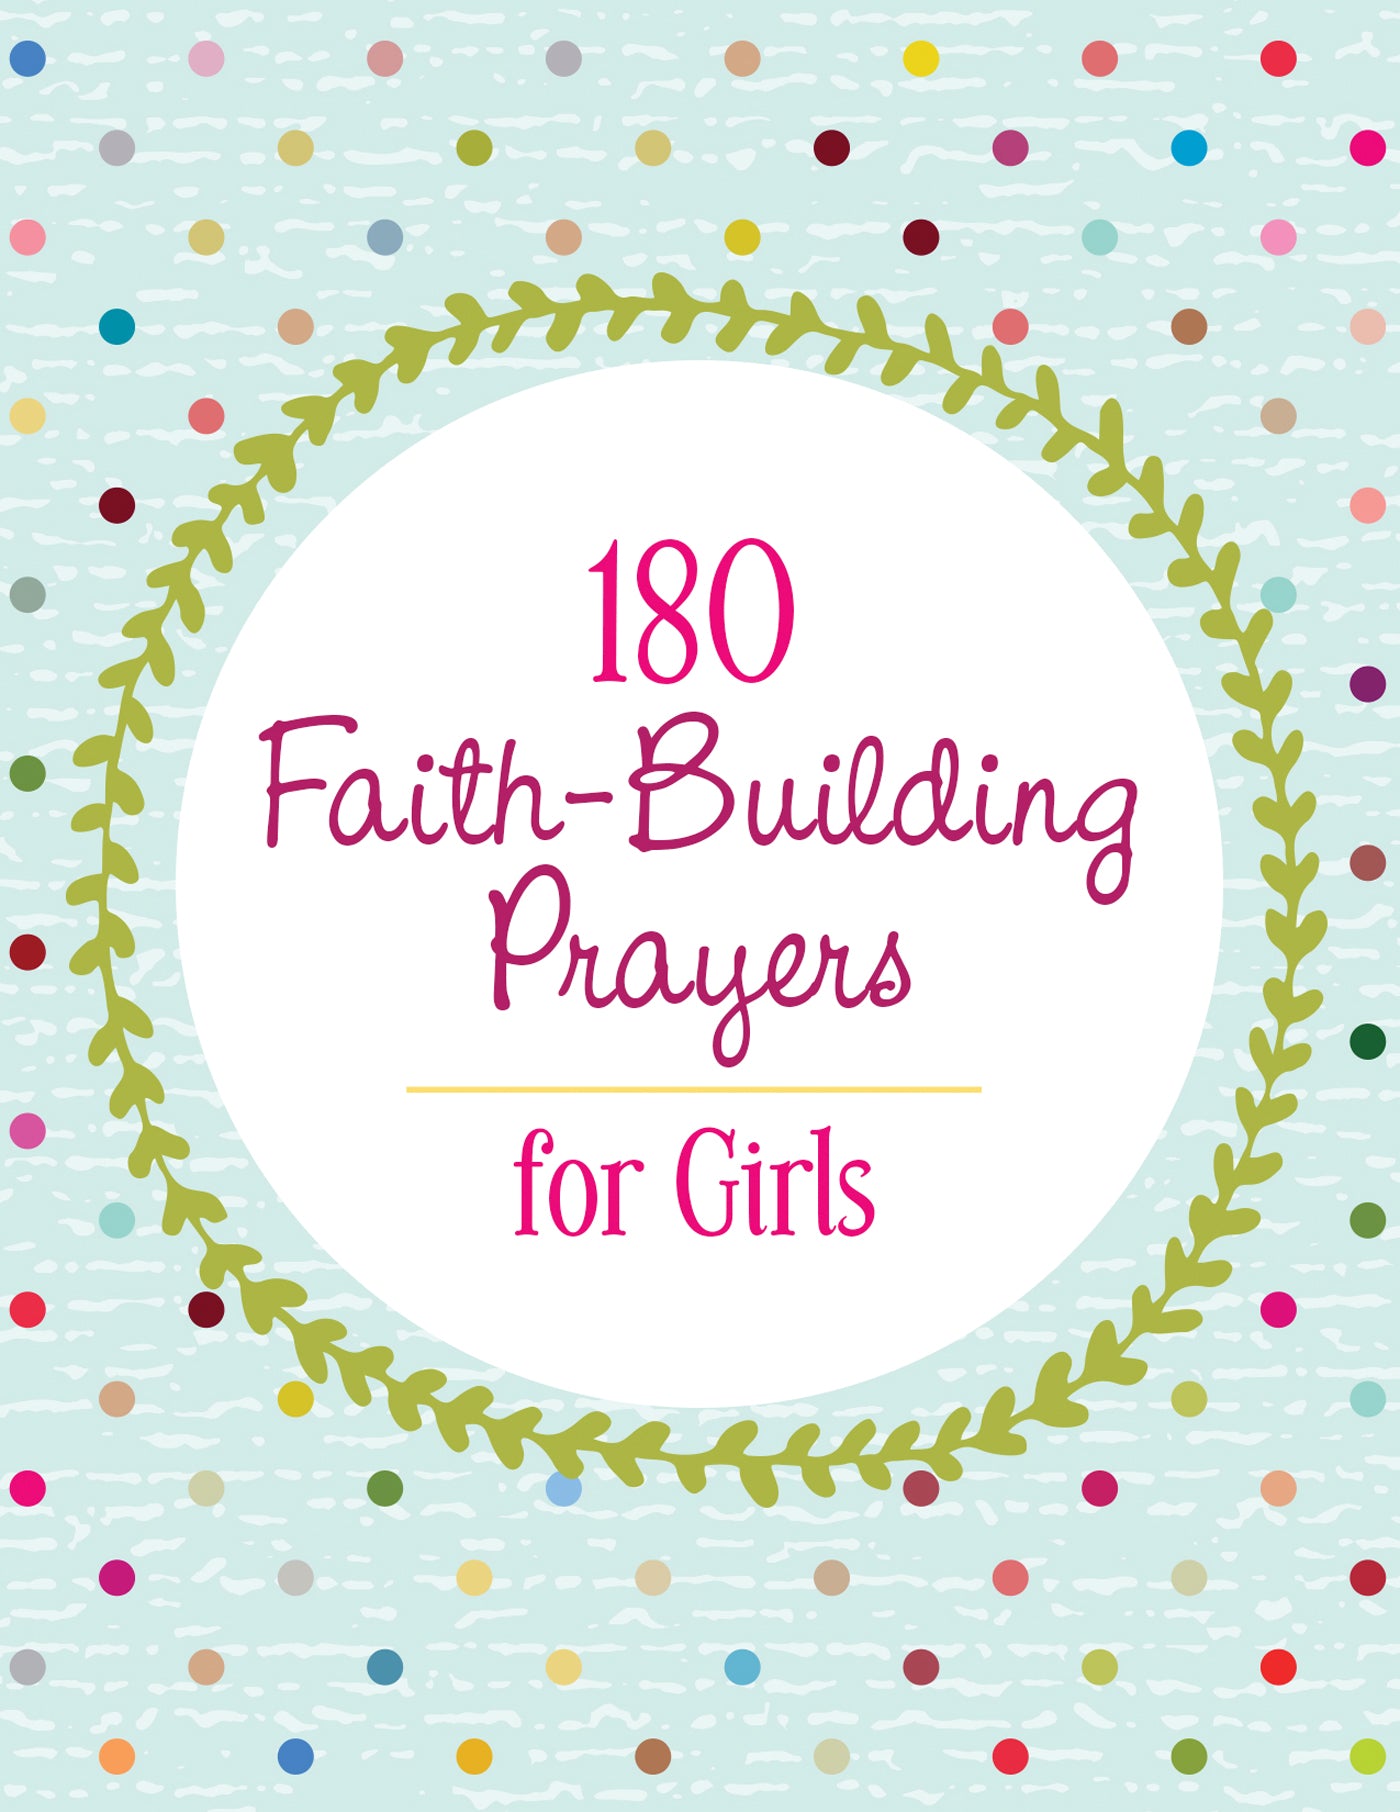 Image of 180 Faith-Building Prayers for Girls other